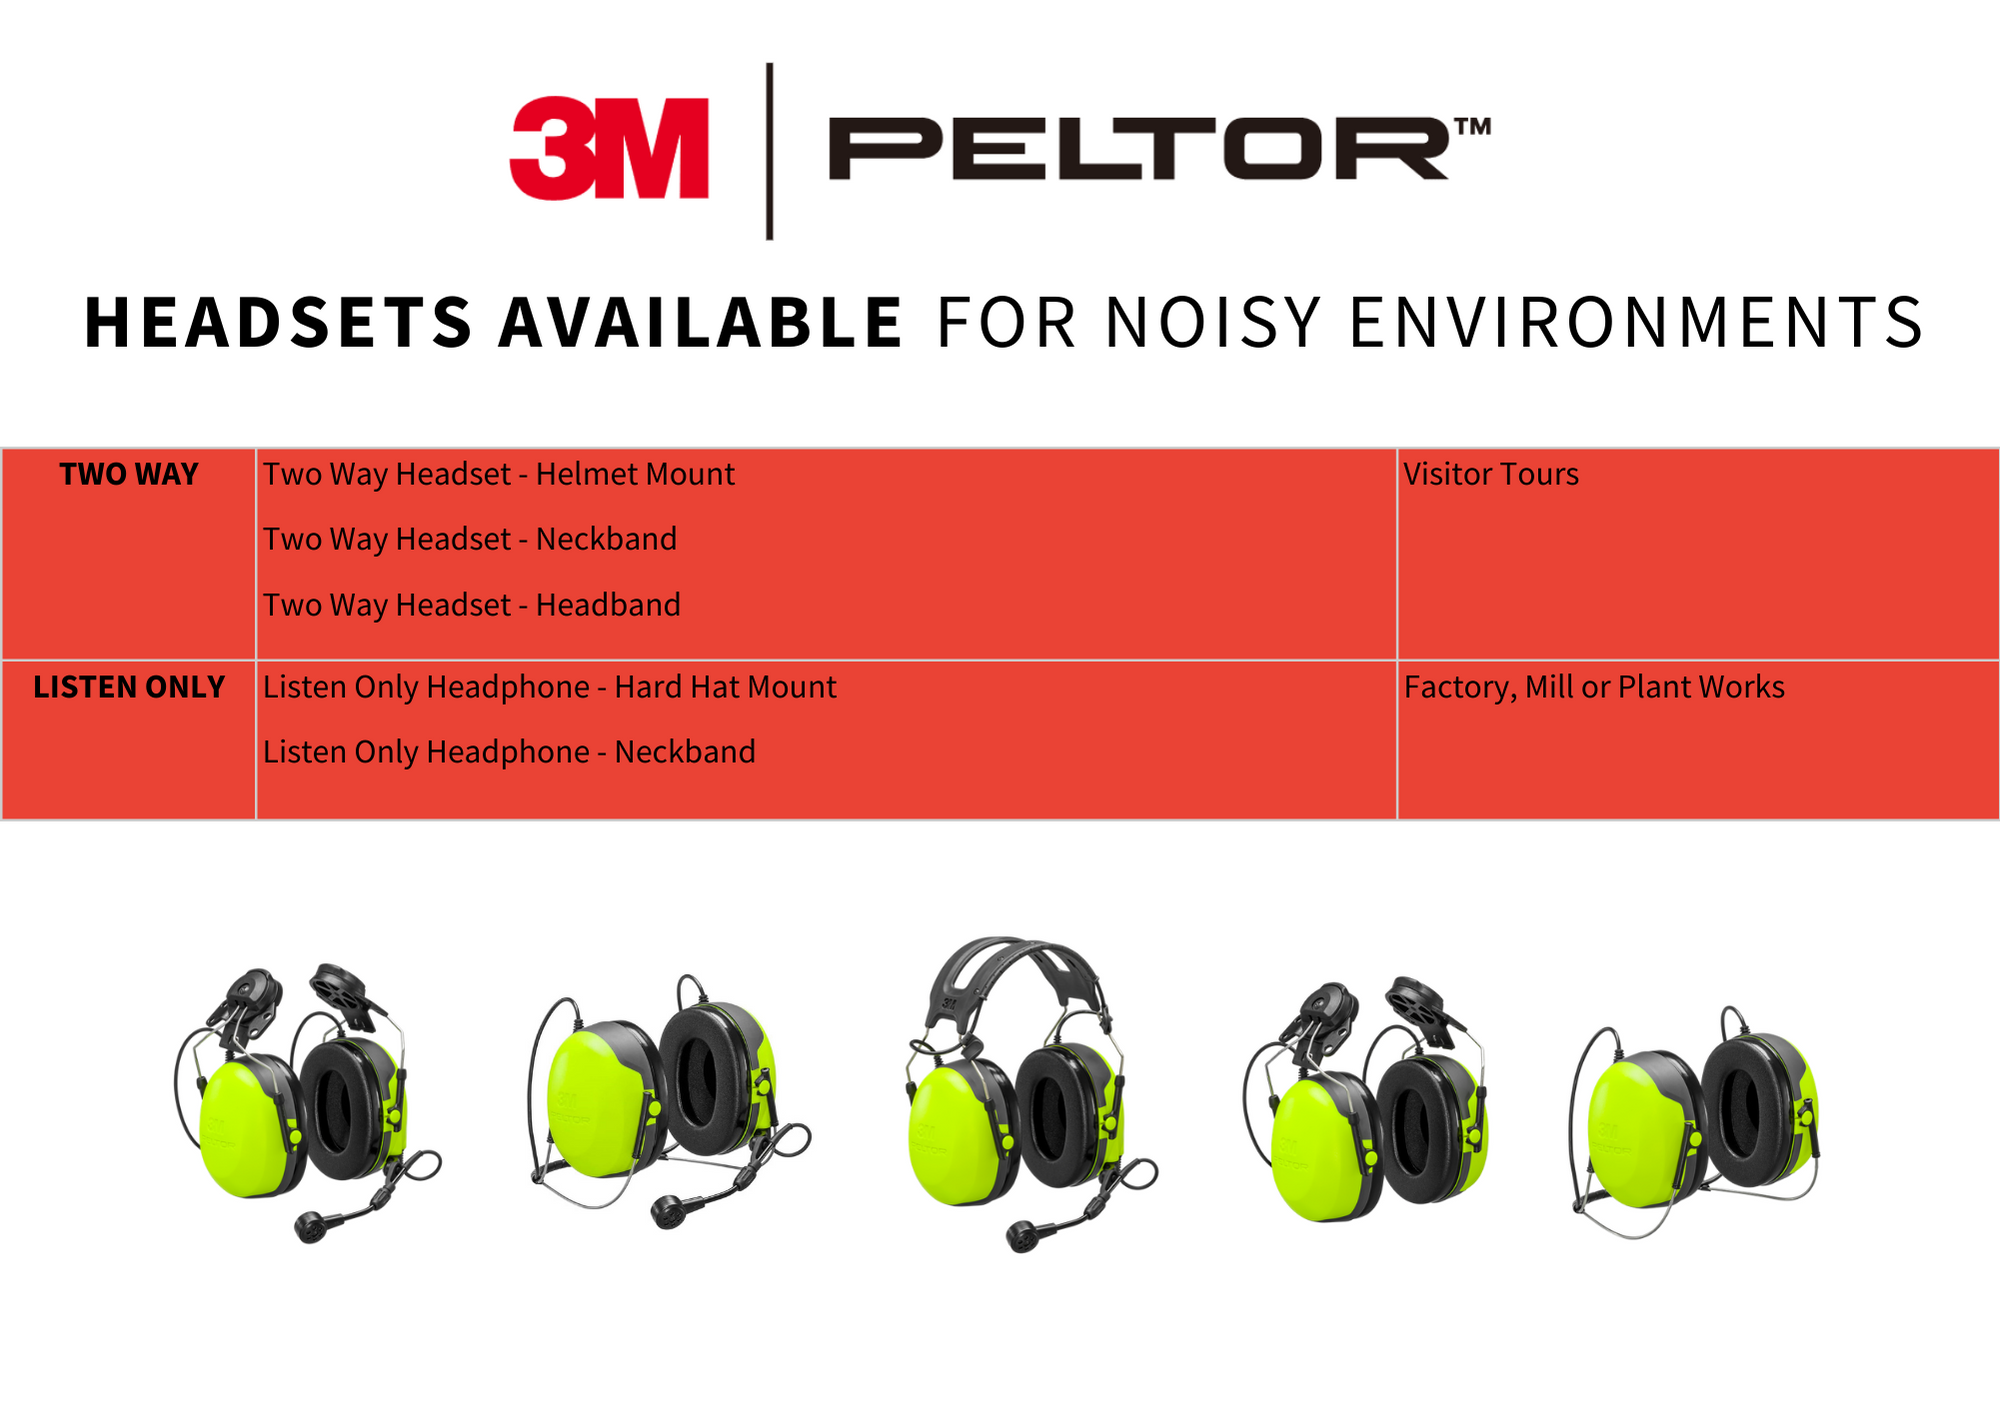 Peltor Headsets available for noisy environments